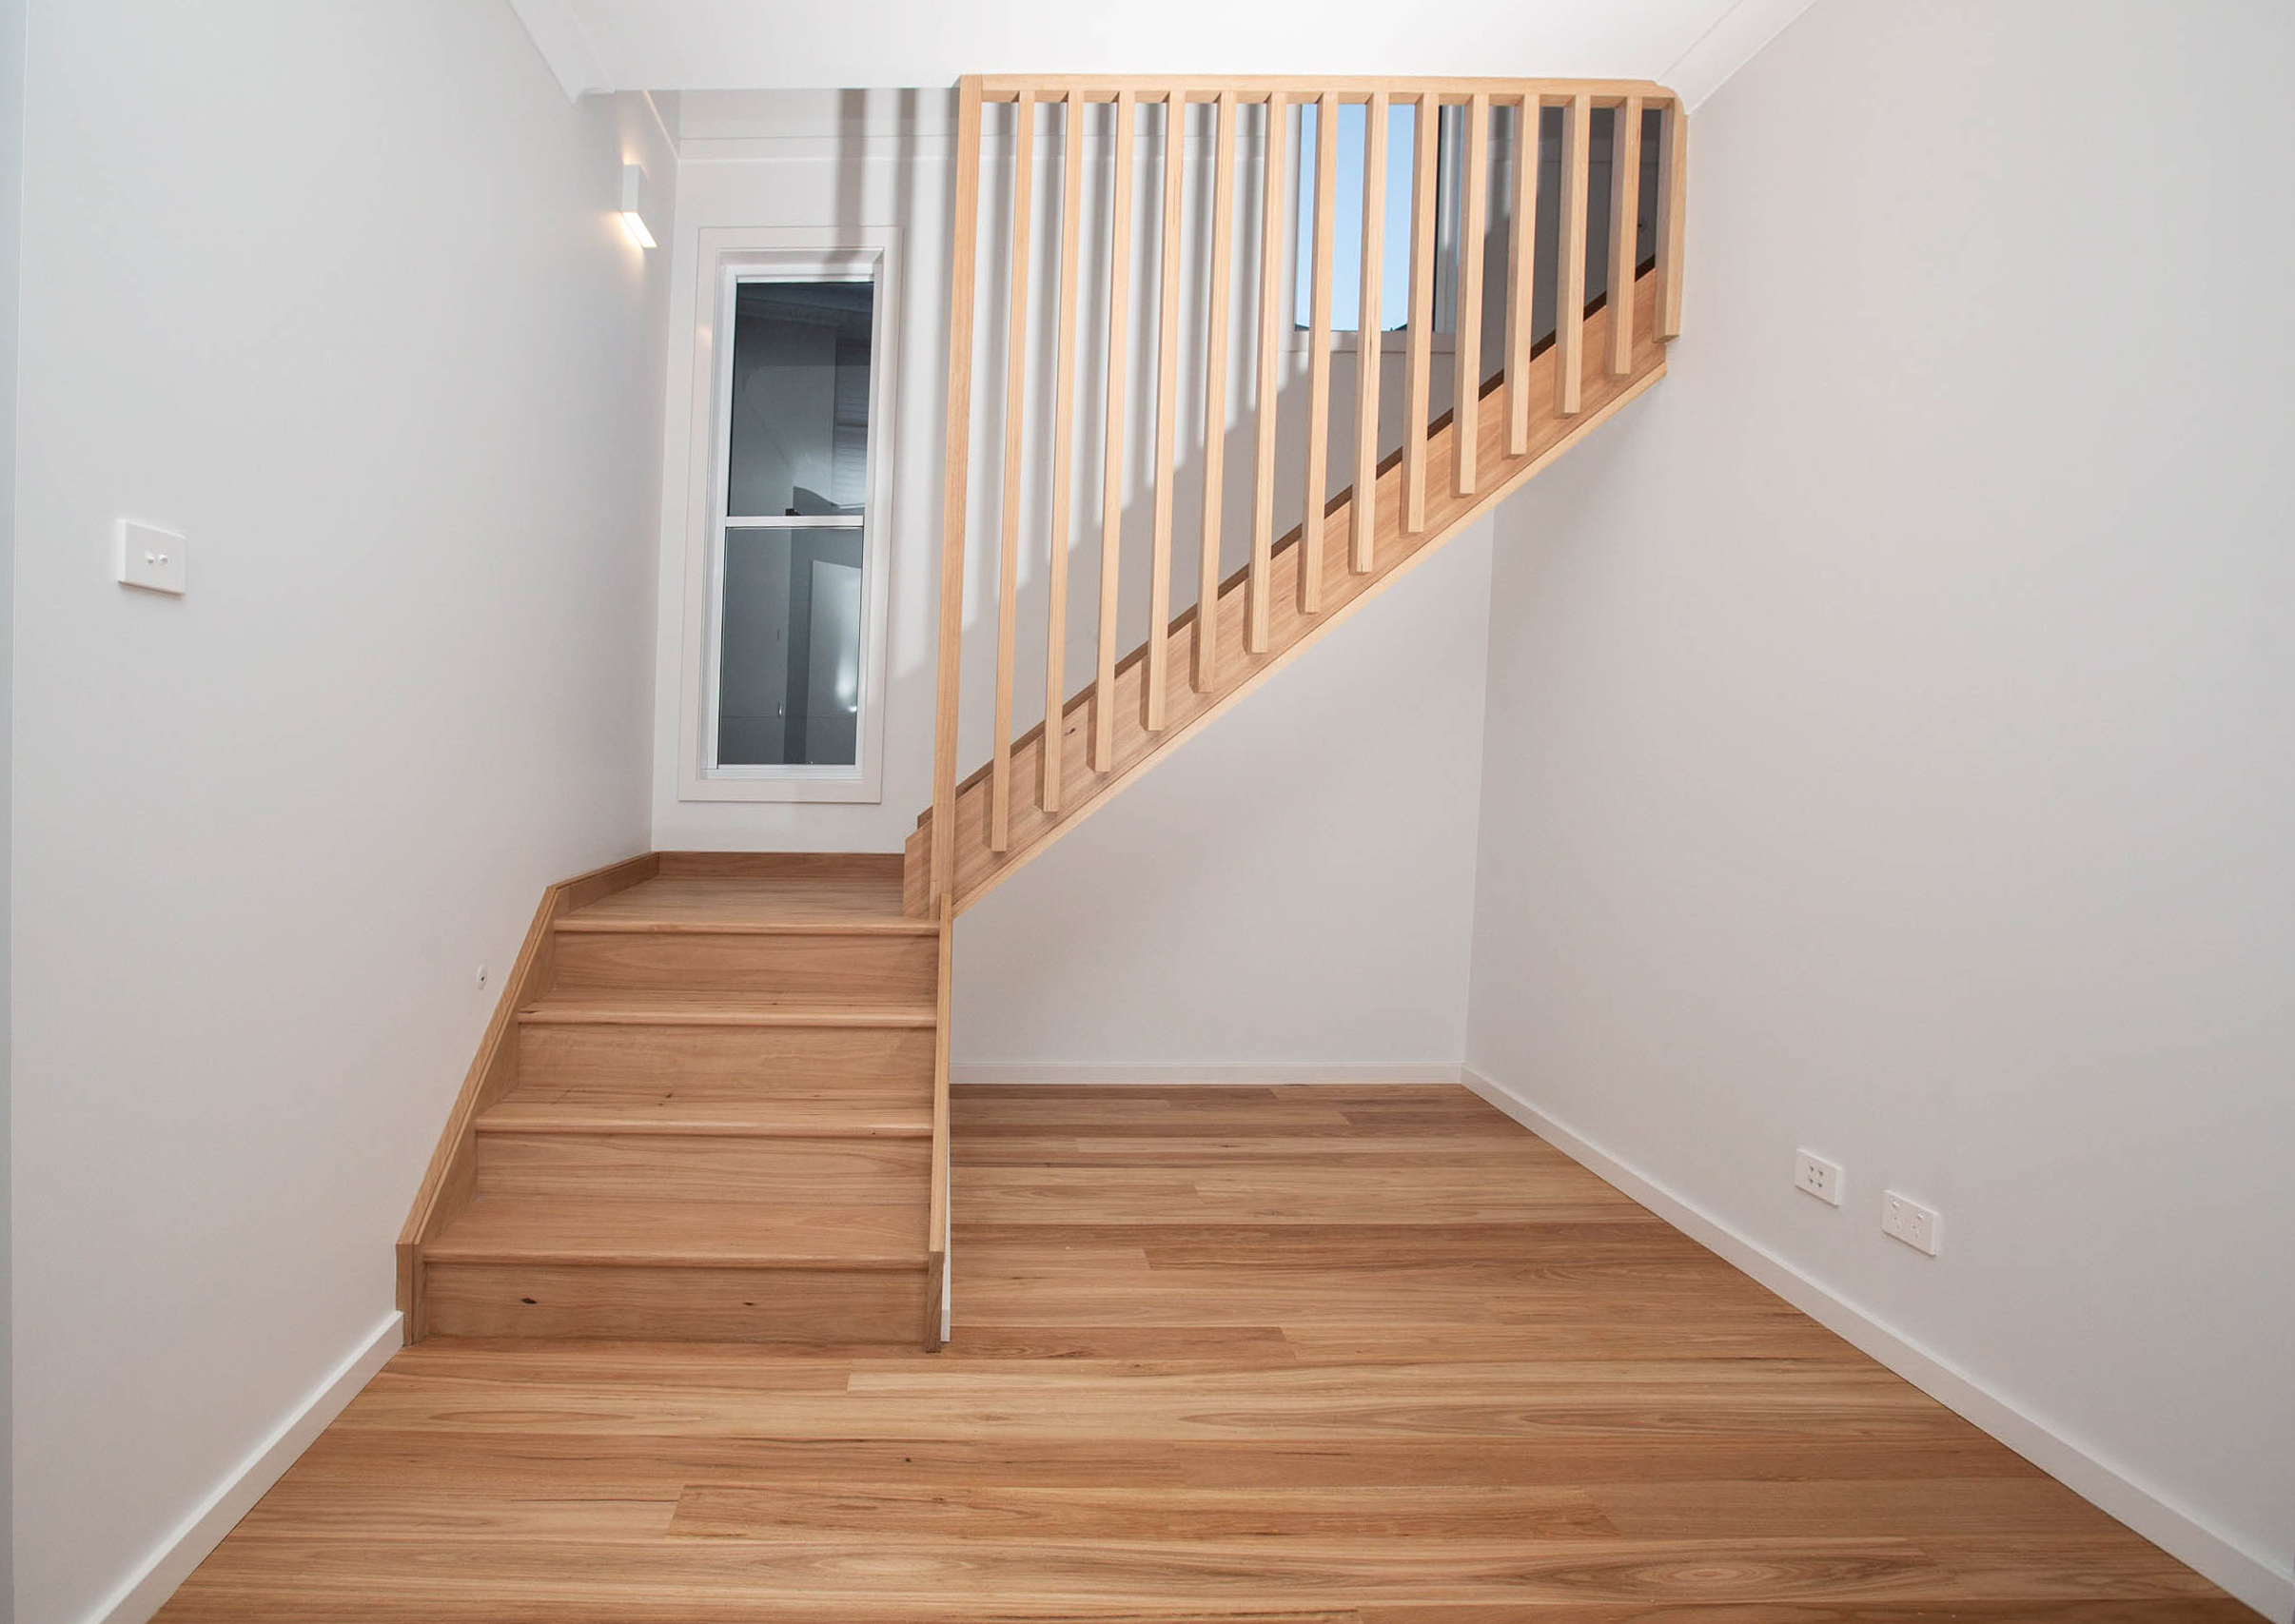 Staircase and floor sanding